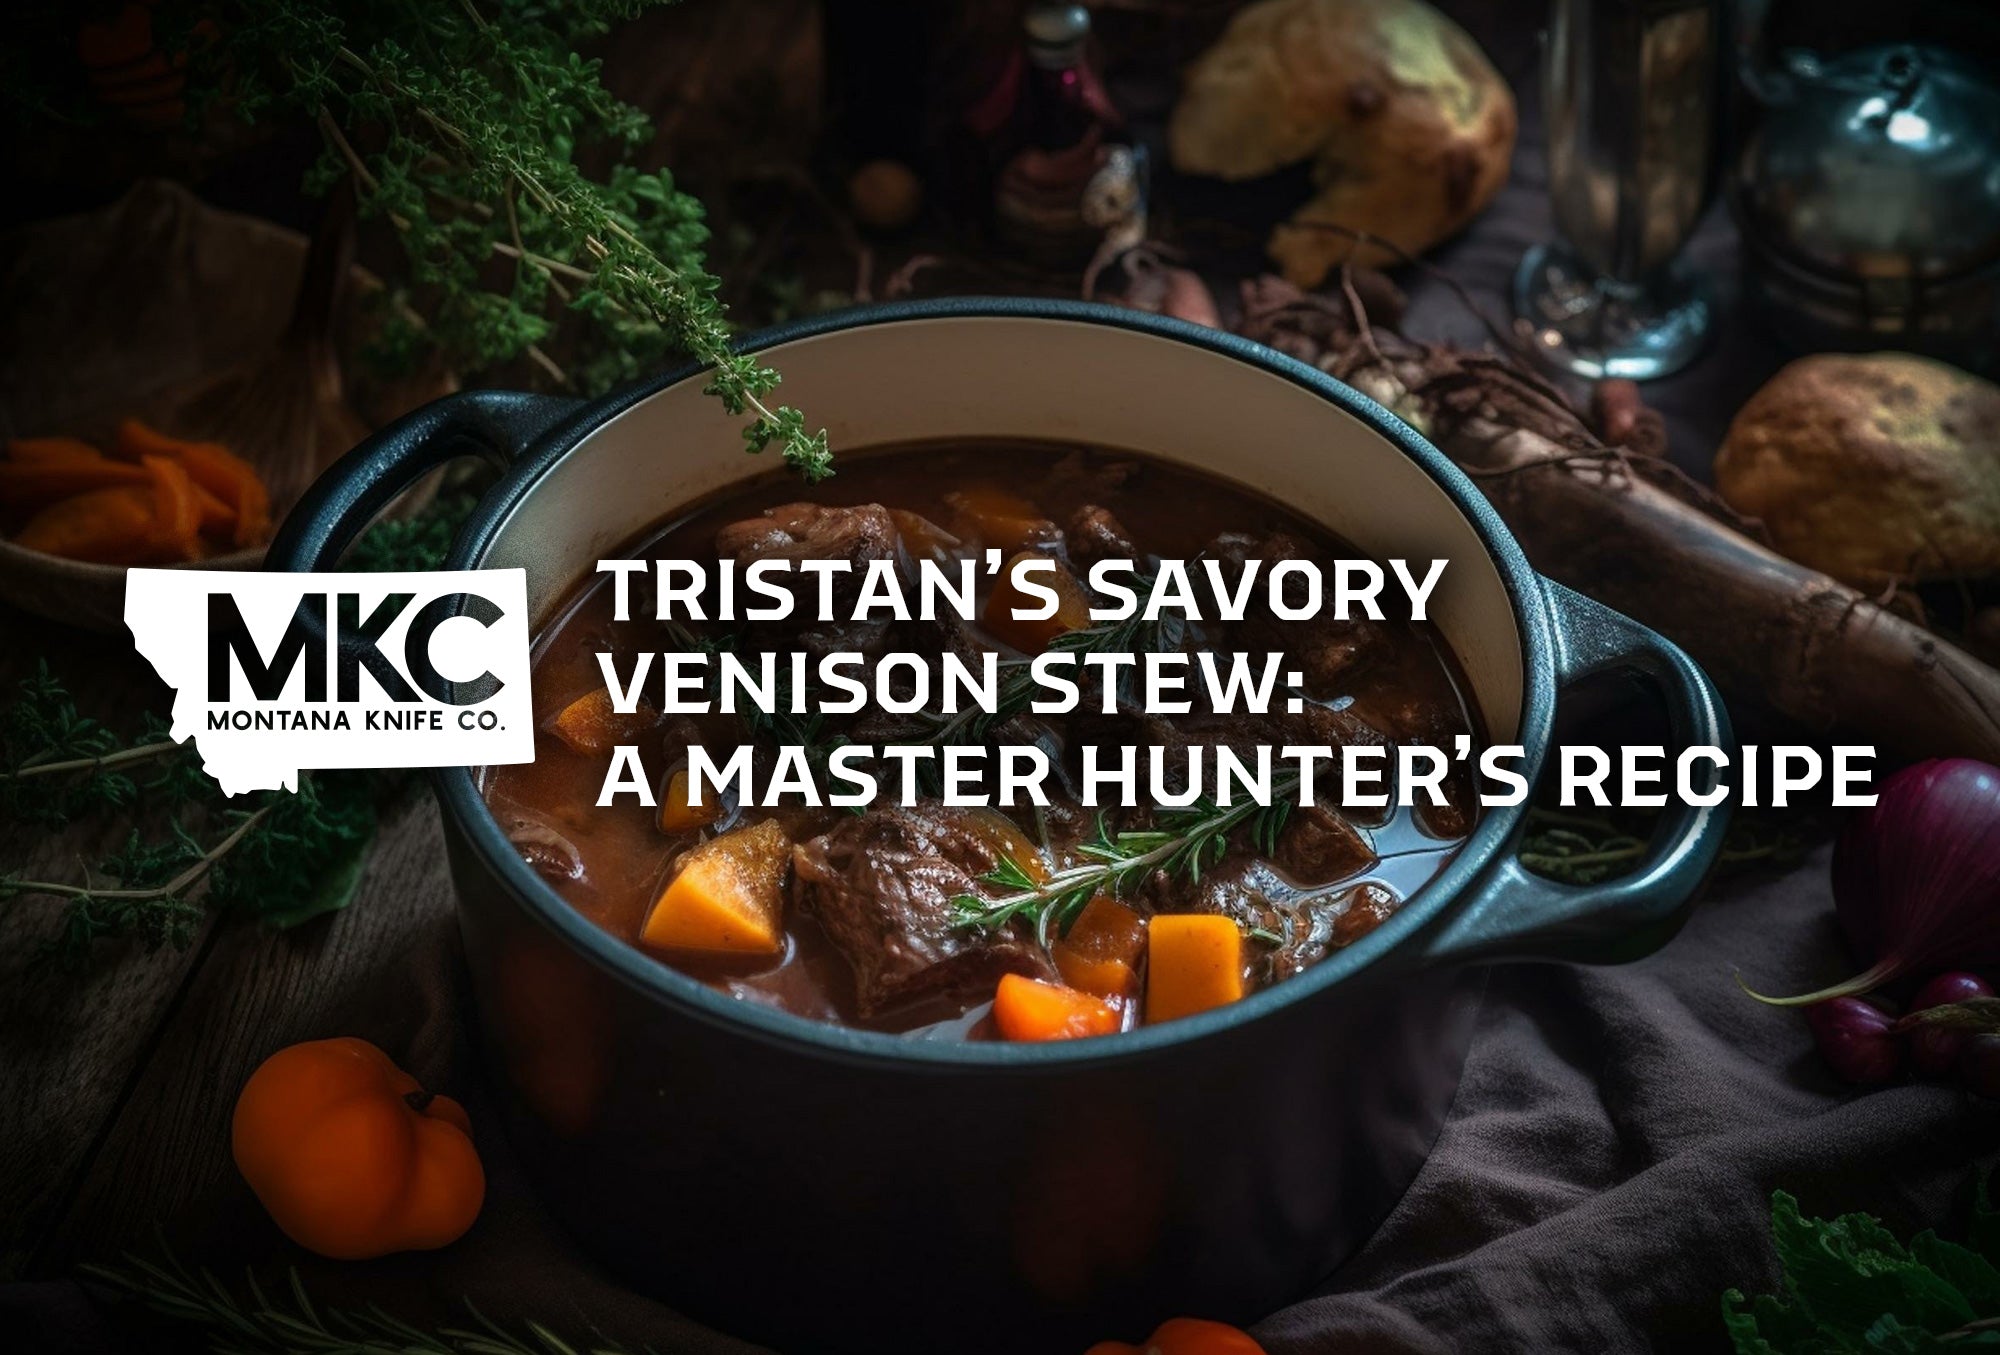 MKC employee Tristan’s savory venison stew recipe sits in a blue enameled pot among veggies and herbs. 